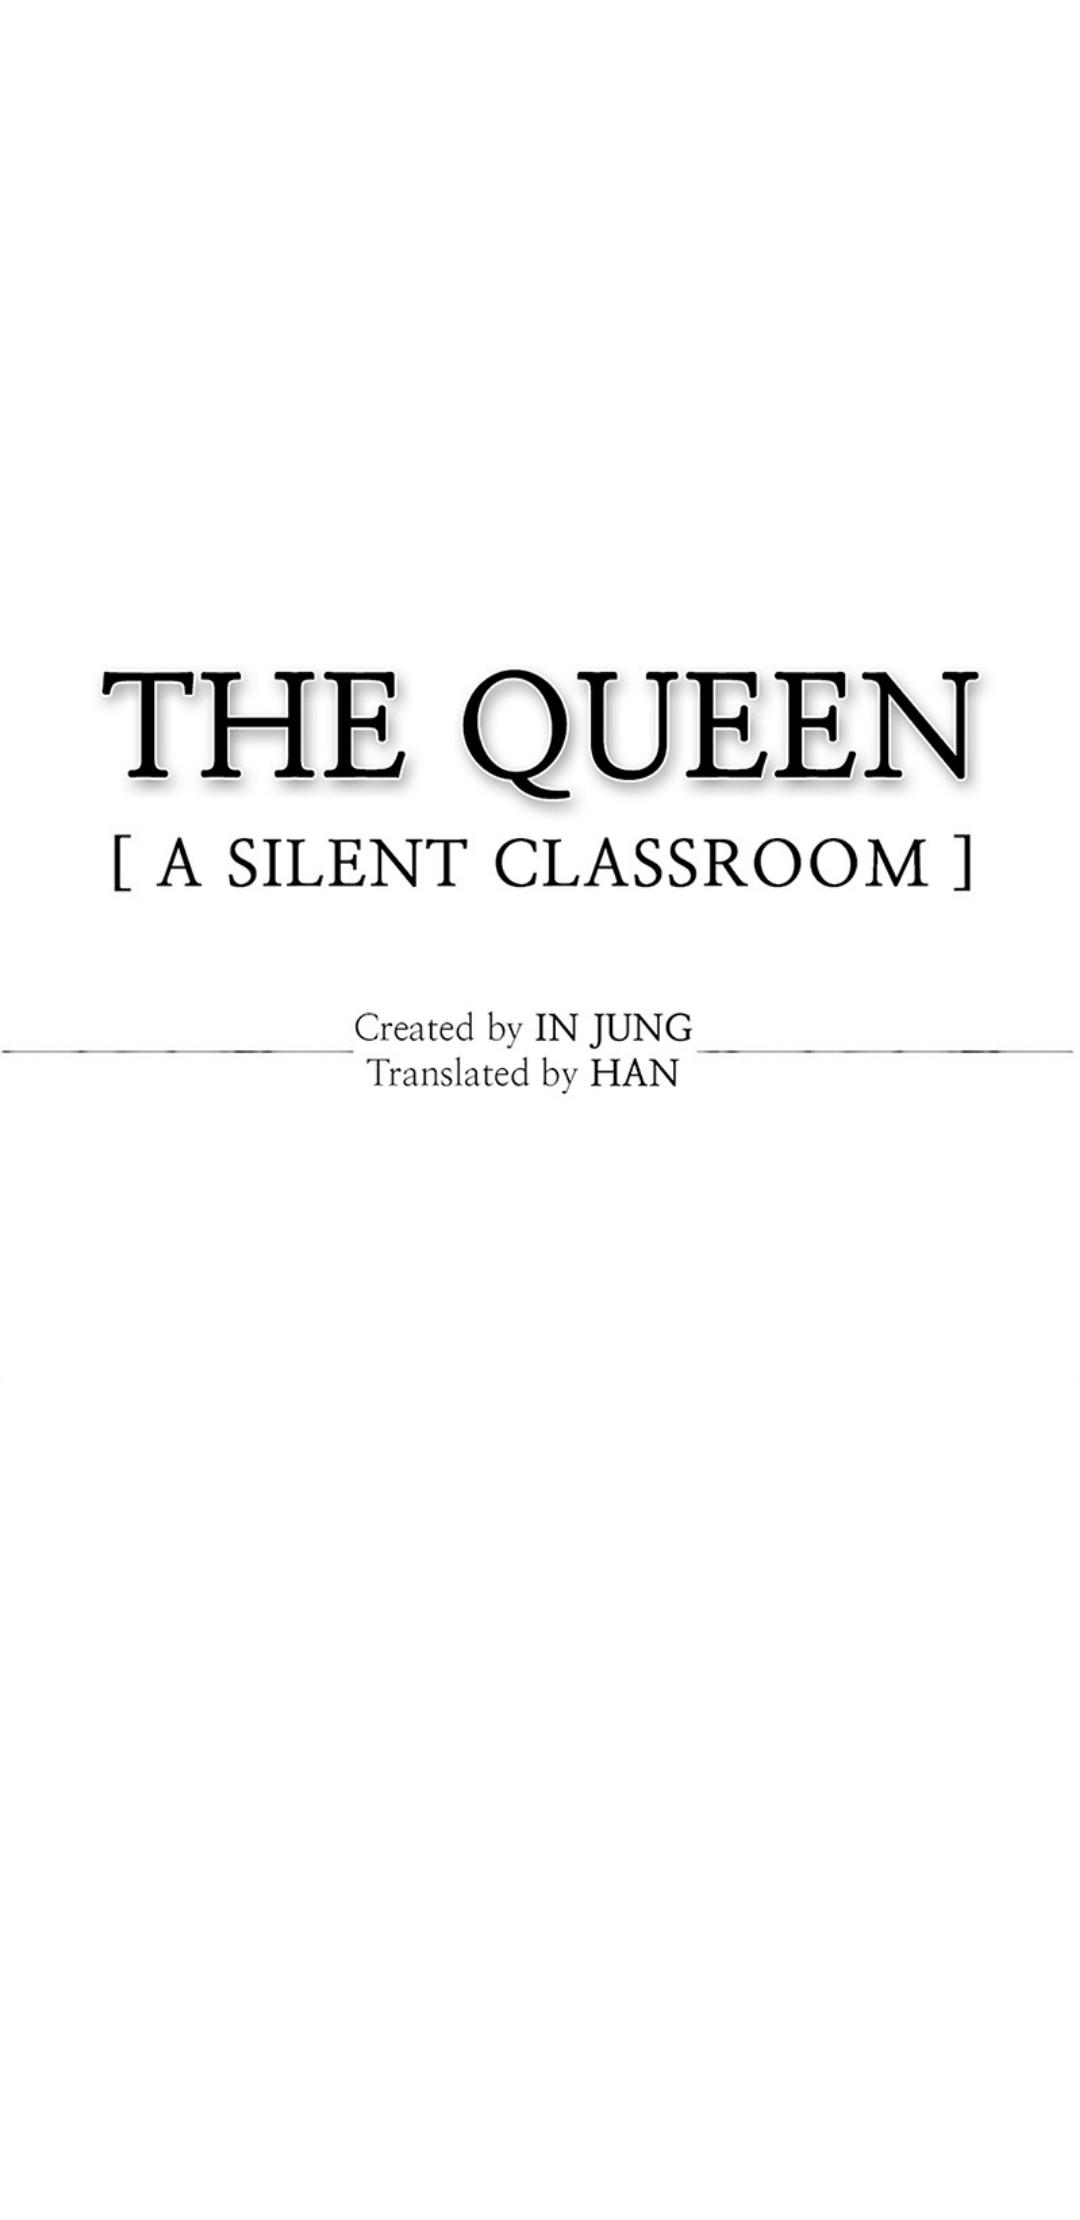 The Queen: Silent Classroom - Page 2